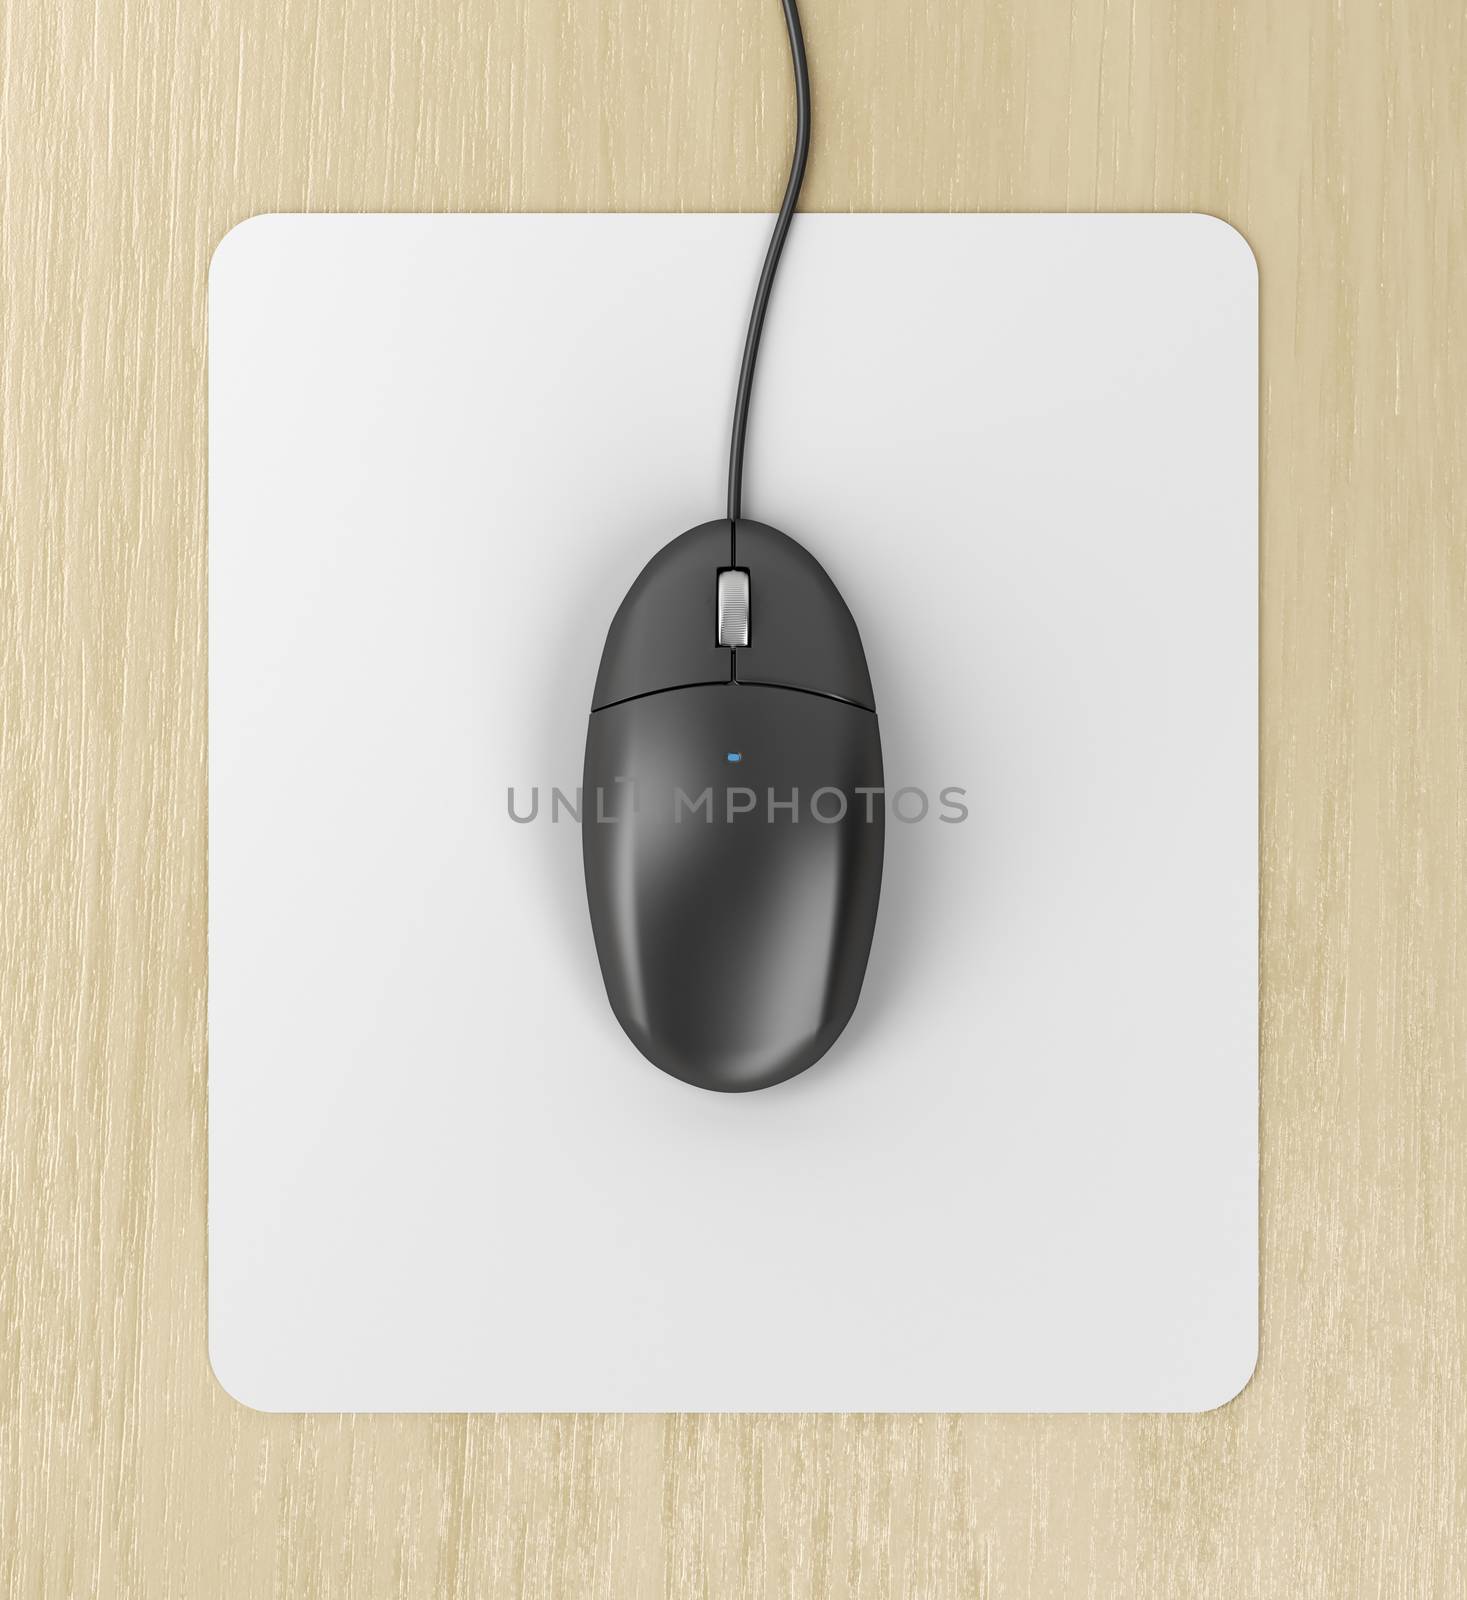 Black computer mouse on a mouse pad, top view
